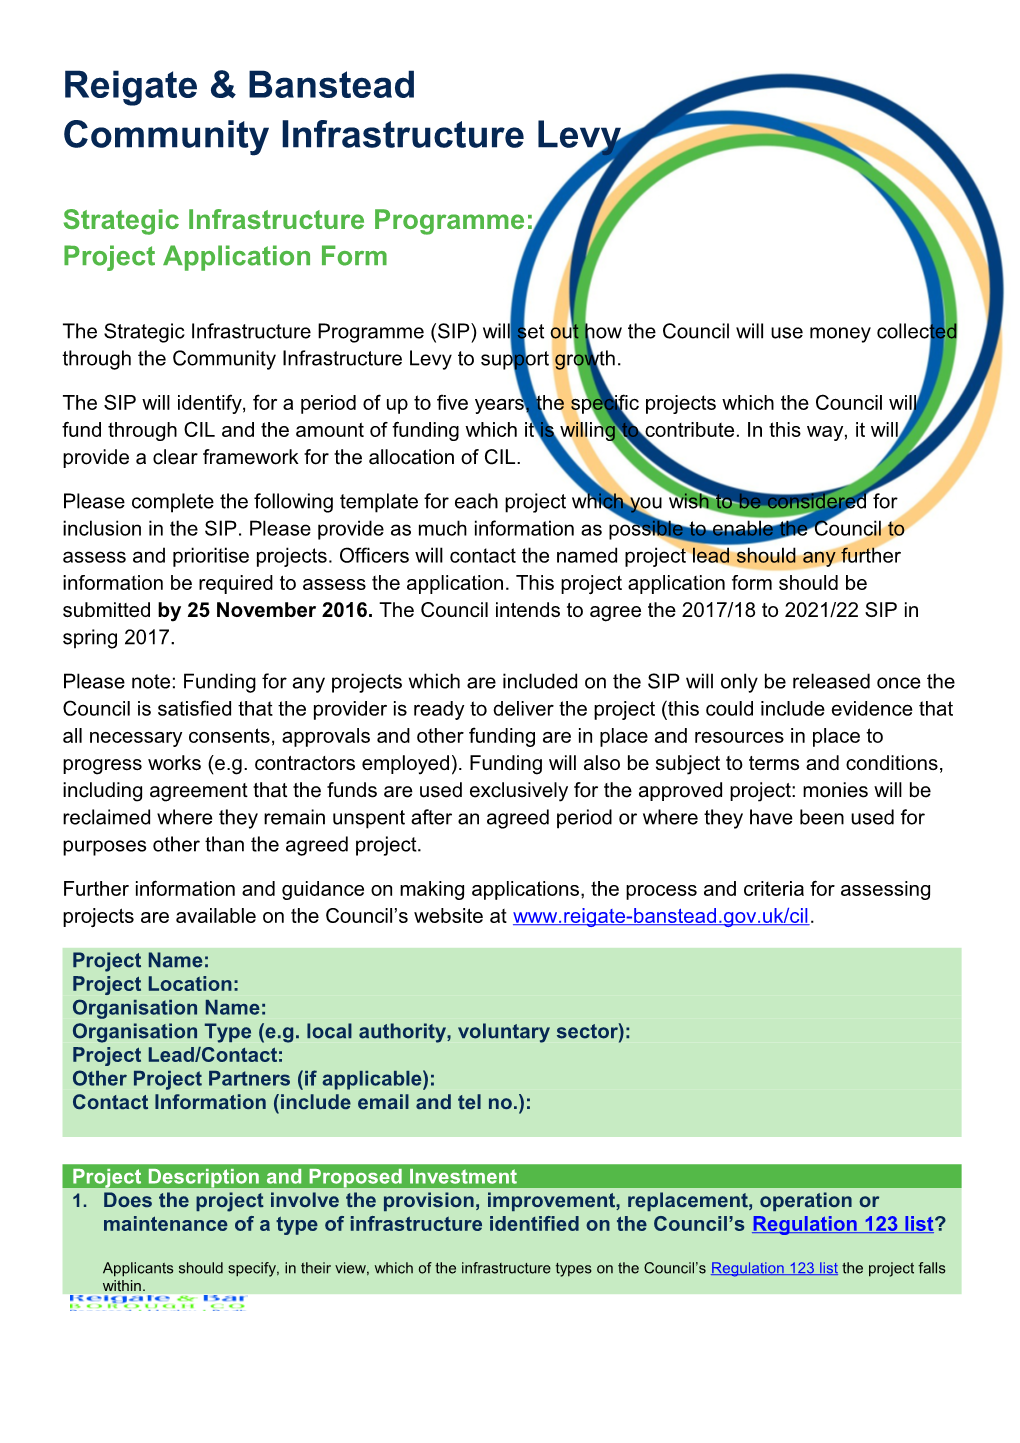 Strategic Infrastructure Programme: Project Application Form